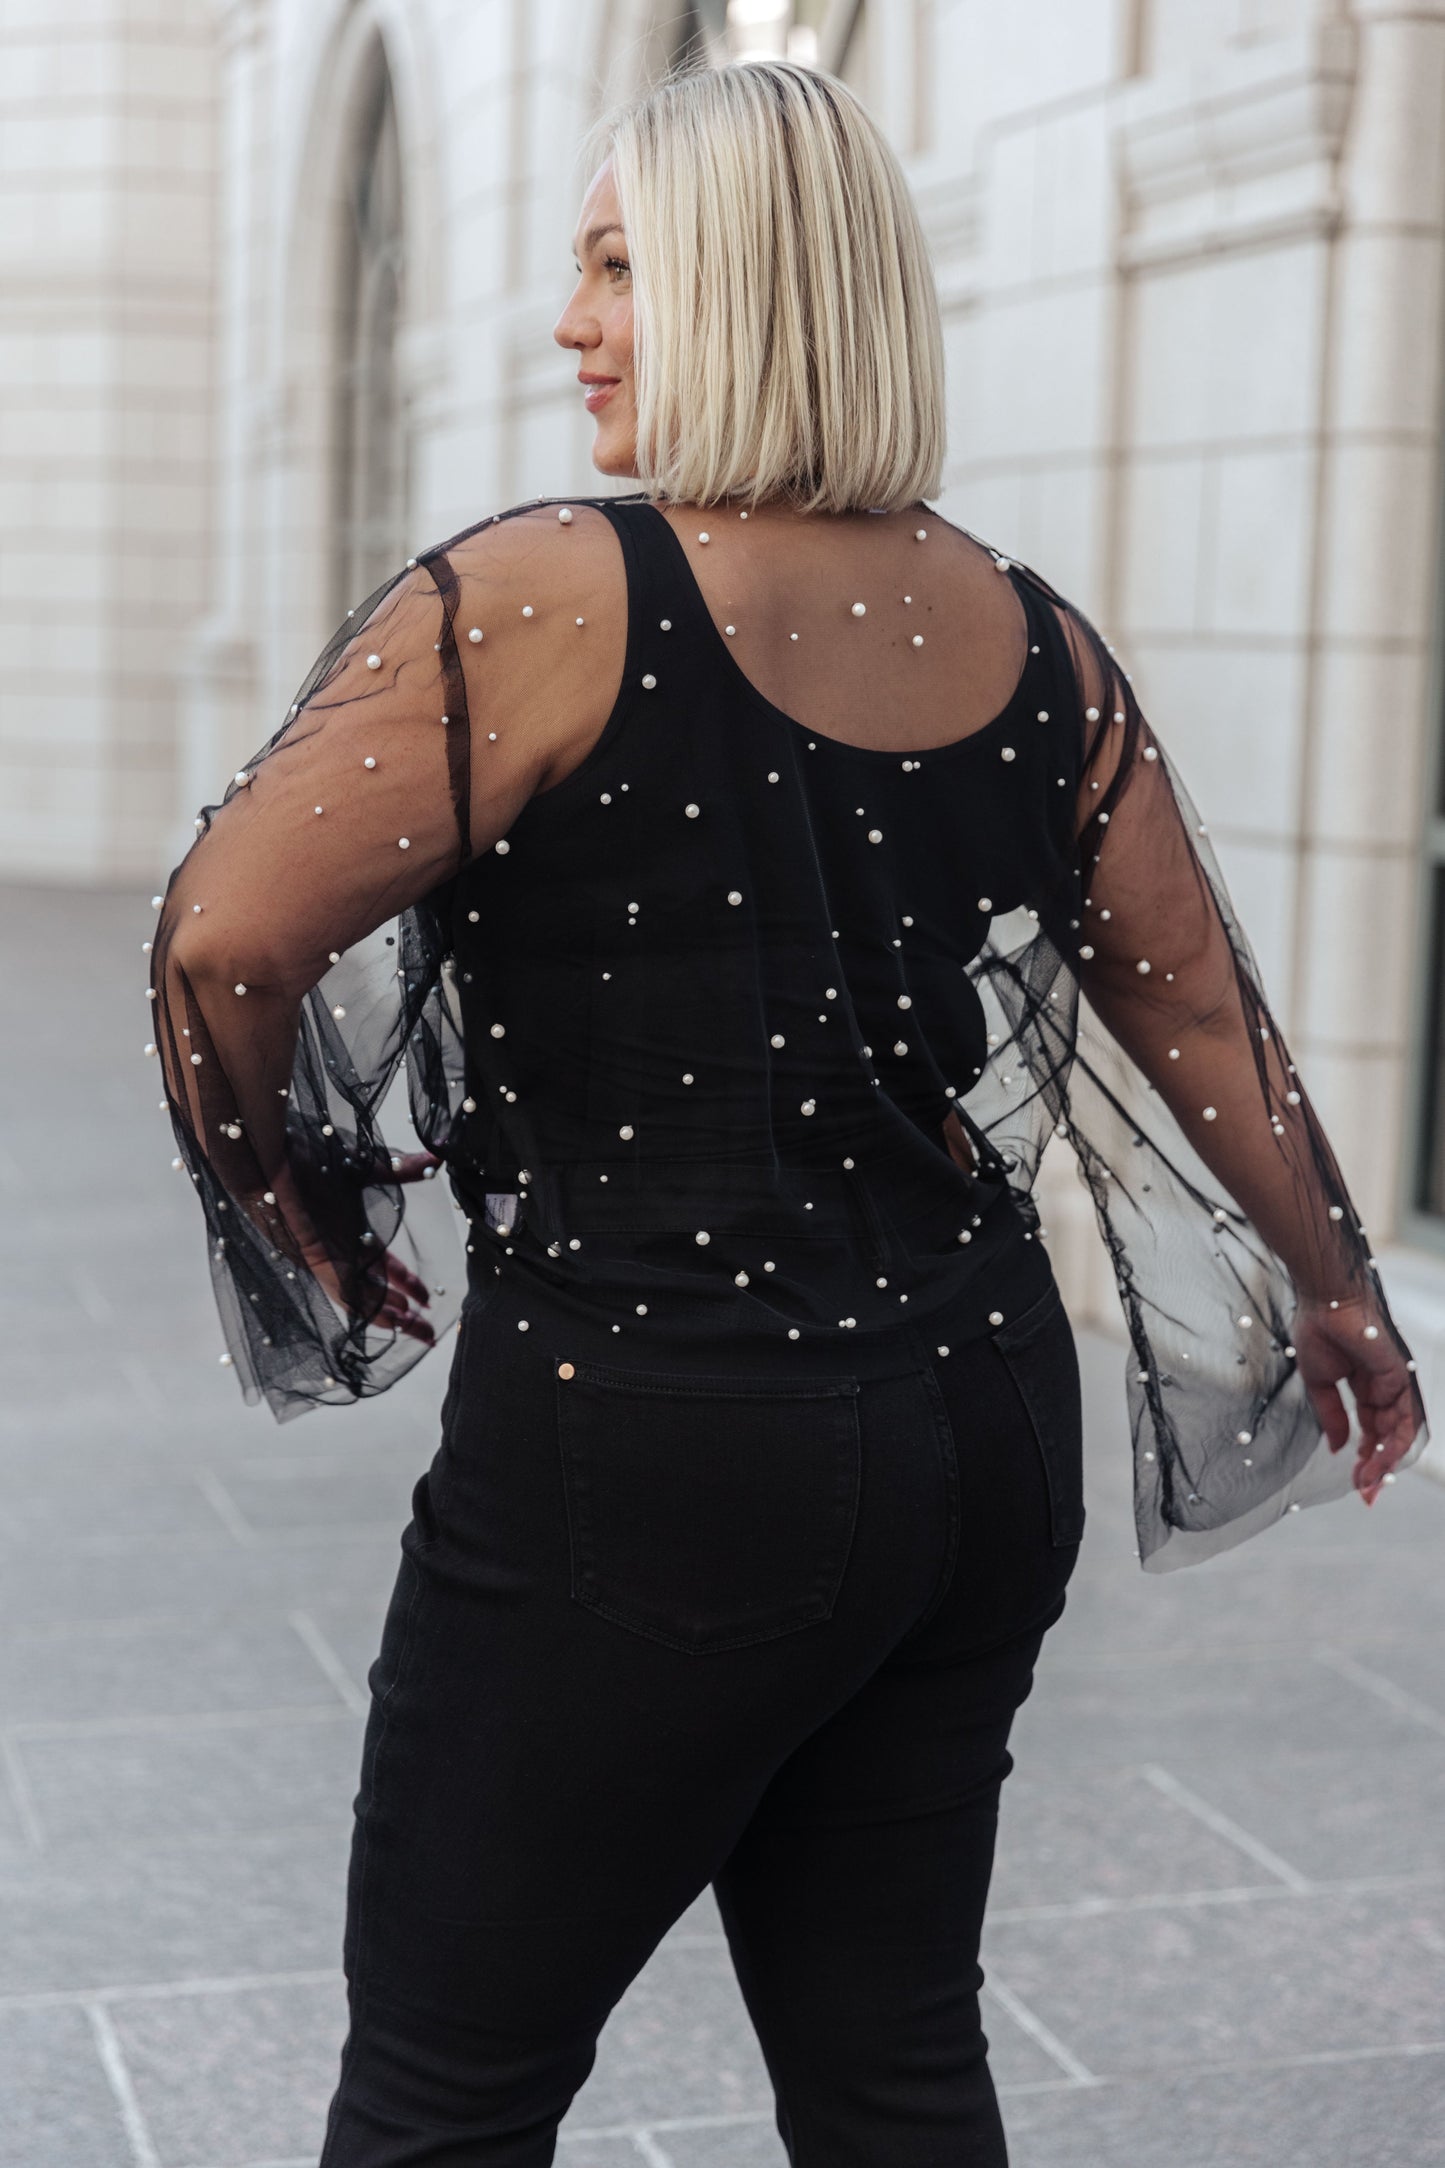 This Sprinkle of Pearls Sheer Kimono is a timeless addition to your wardrobe. Sheer mesh is dotted with faux pearls for a subtle hint of sparkle. This chic kimono has an open front with an optional tie front to flatter your figure. Long sleeves complete the look.